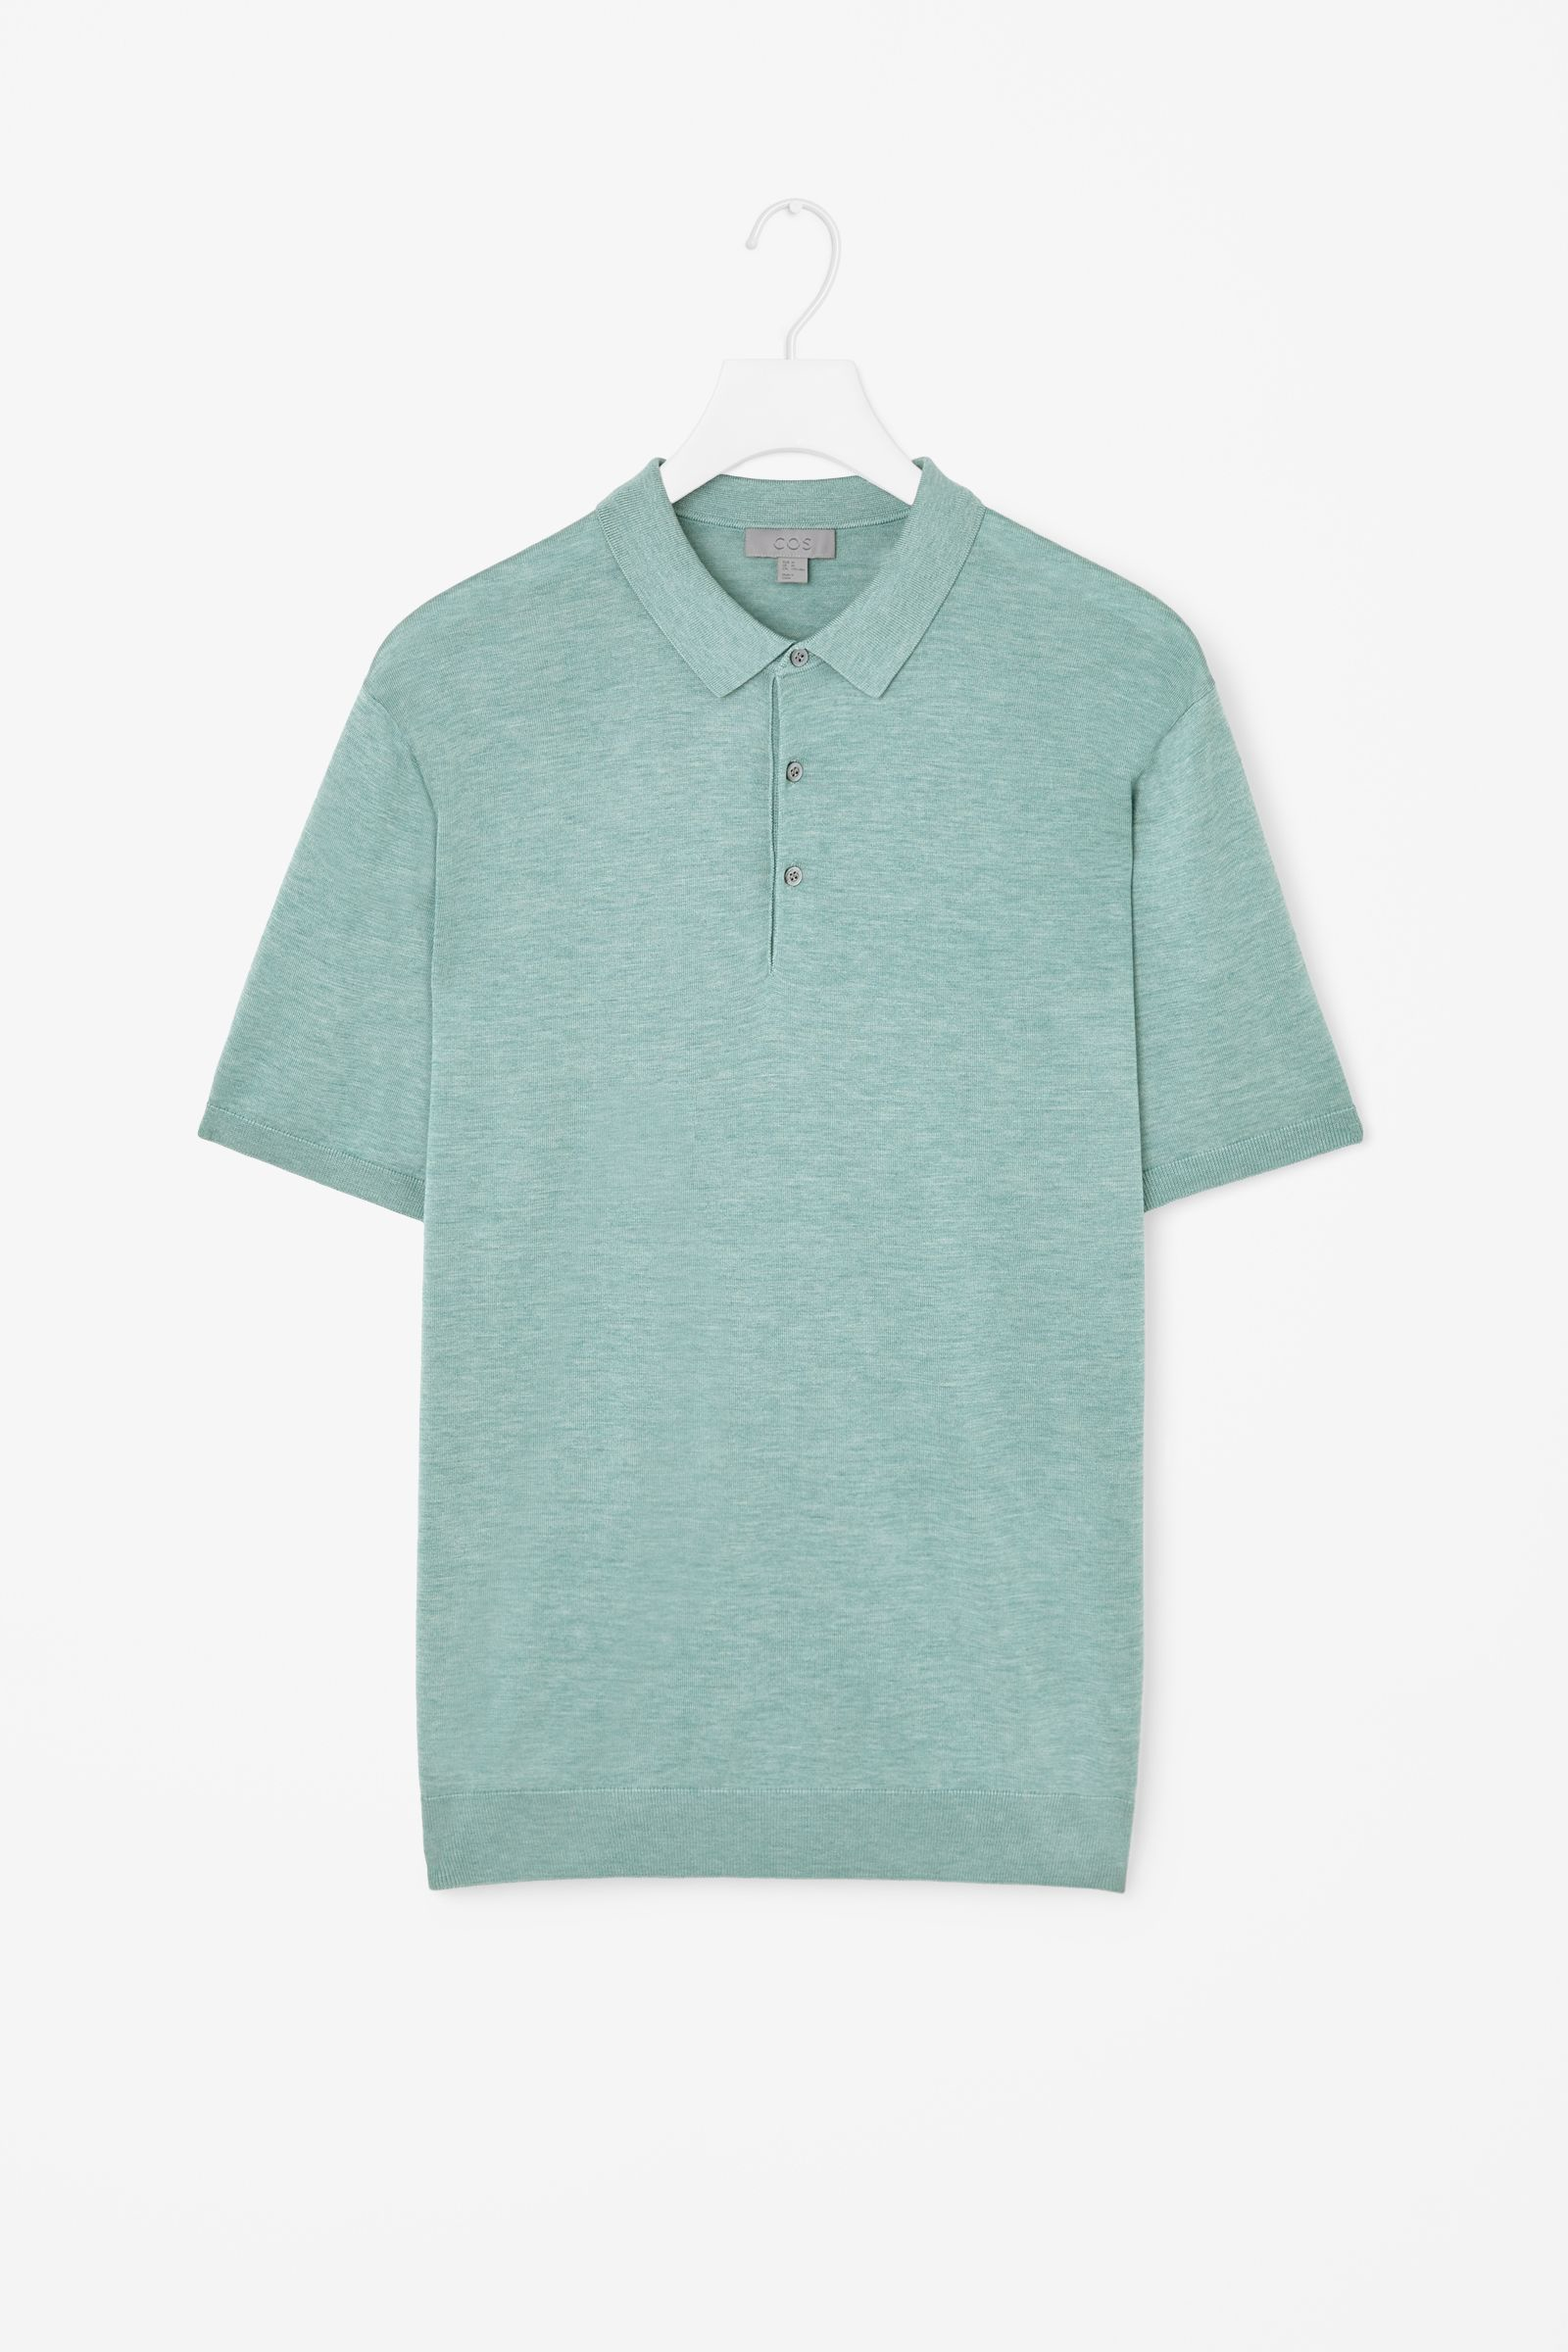 Cos Silk Cotton Polo Shirt in Green for Men (Mint Green) | Lyst